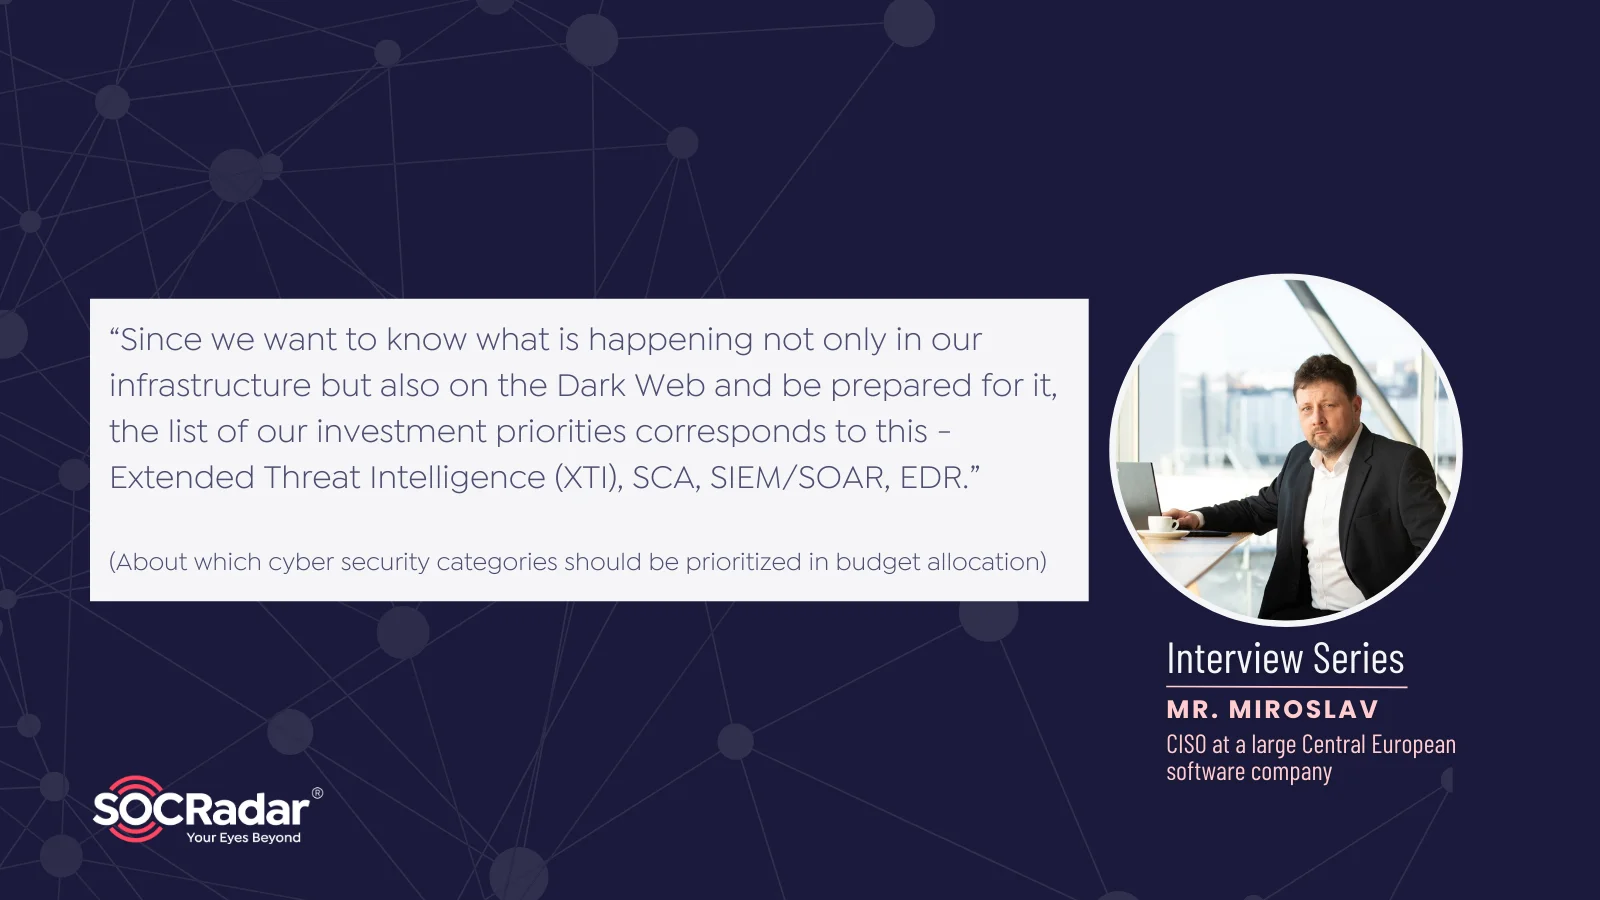 CISO Mr. Miroslav on Cybersecurity Investments